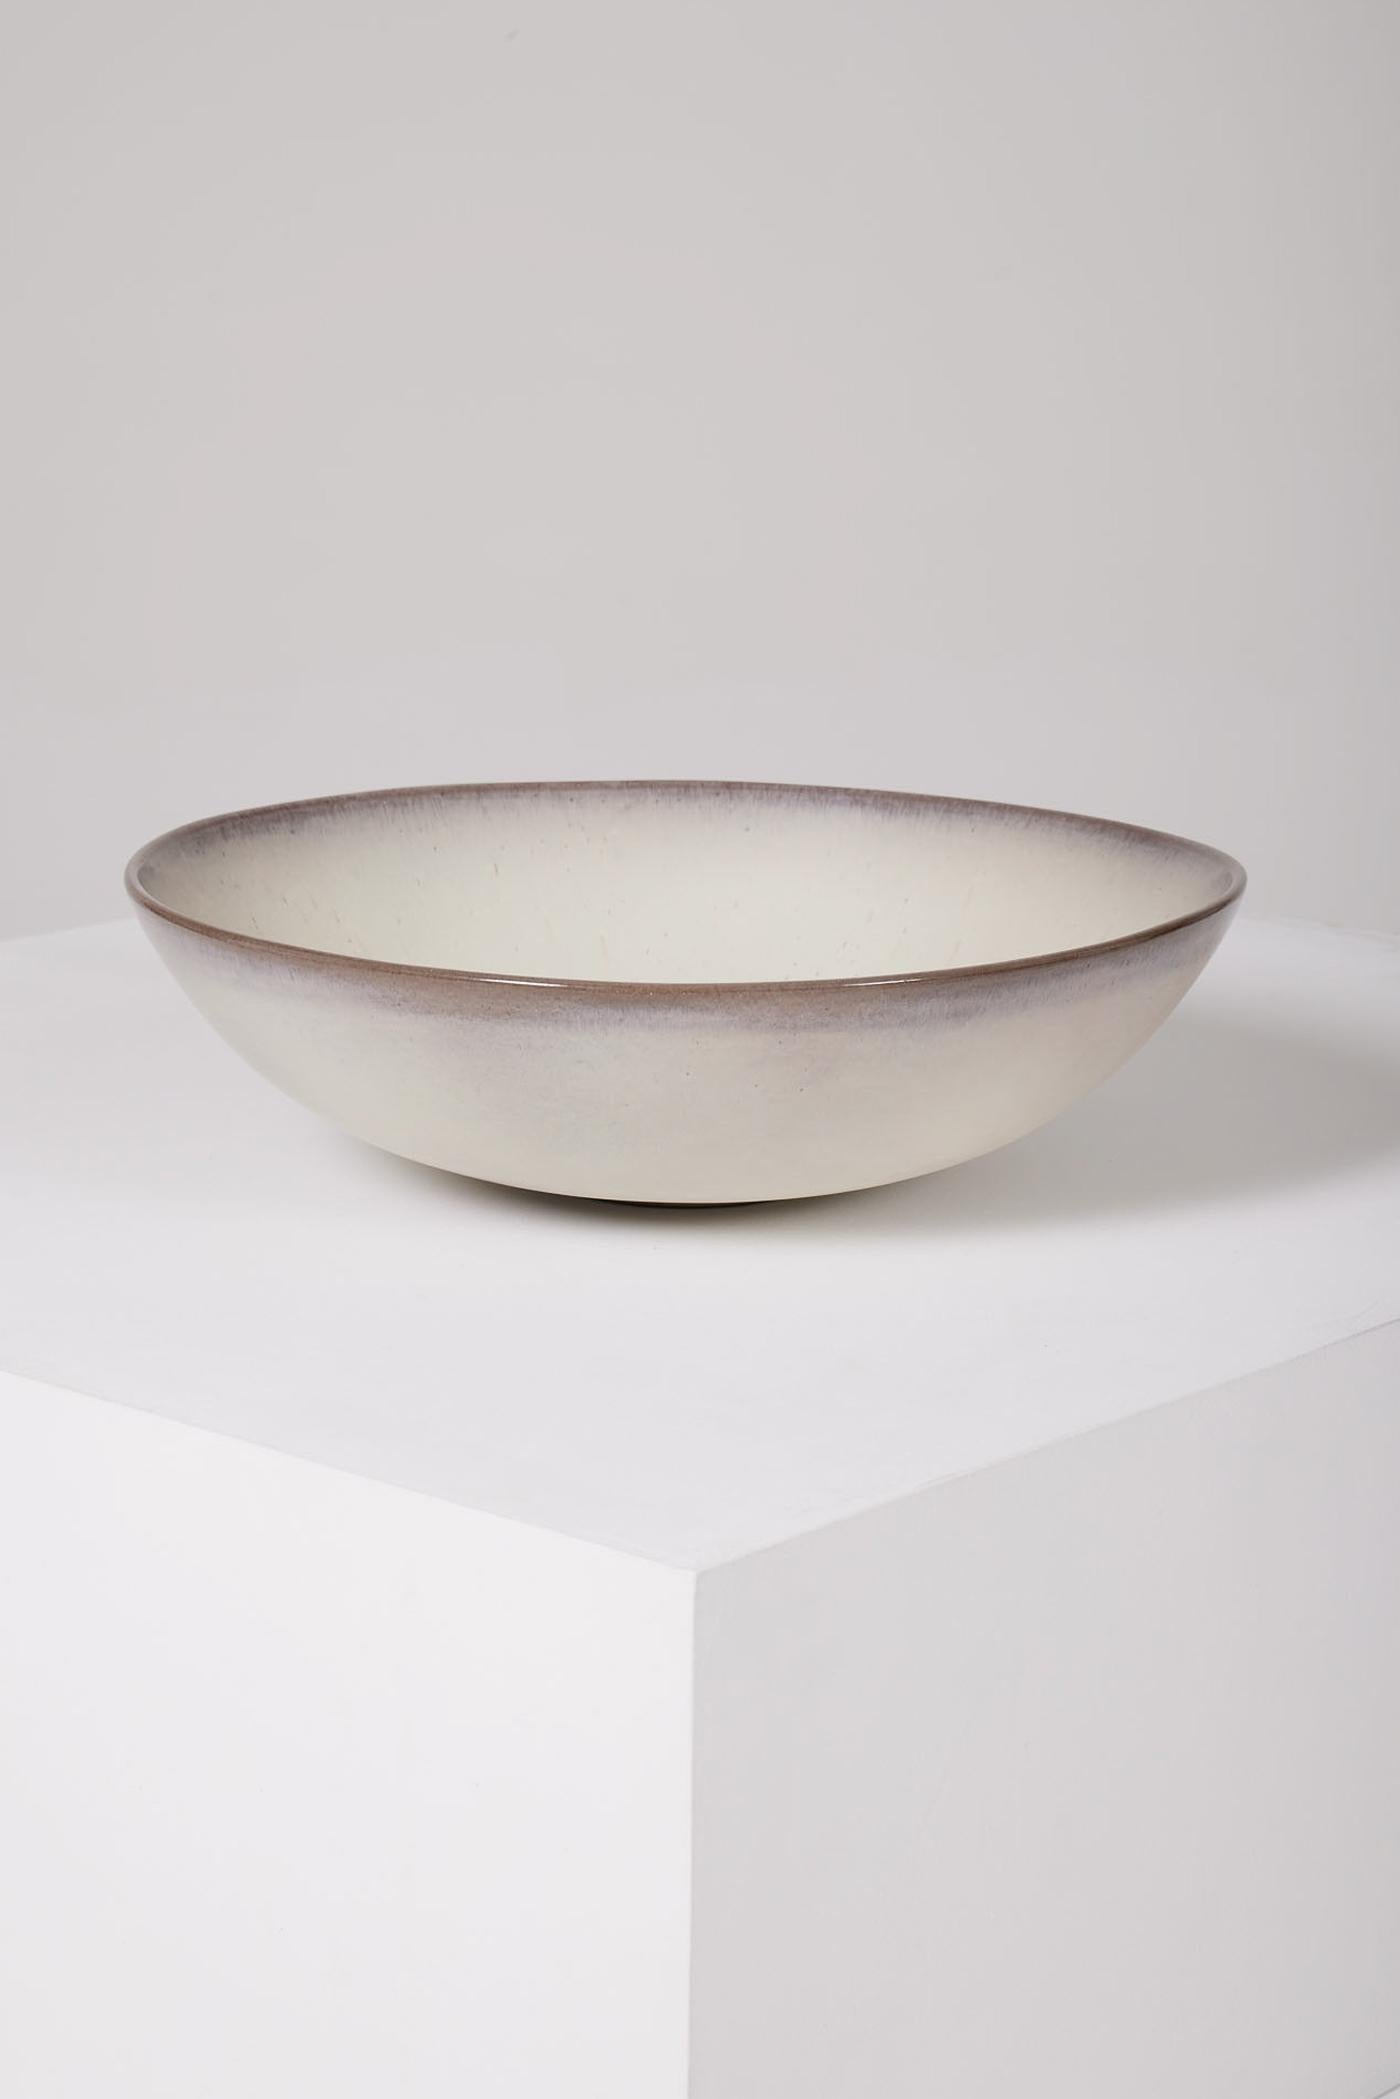 Large white glazed ceramic bowl by Jacques and Dani Ruelland, 1960s. Very good condition.
LP1361